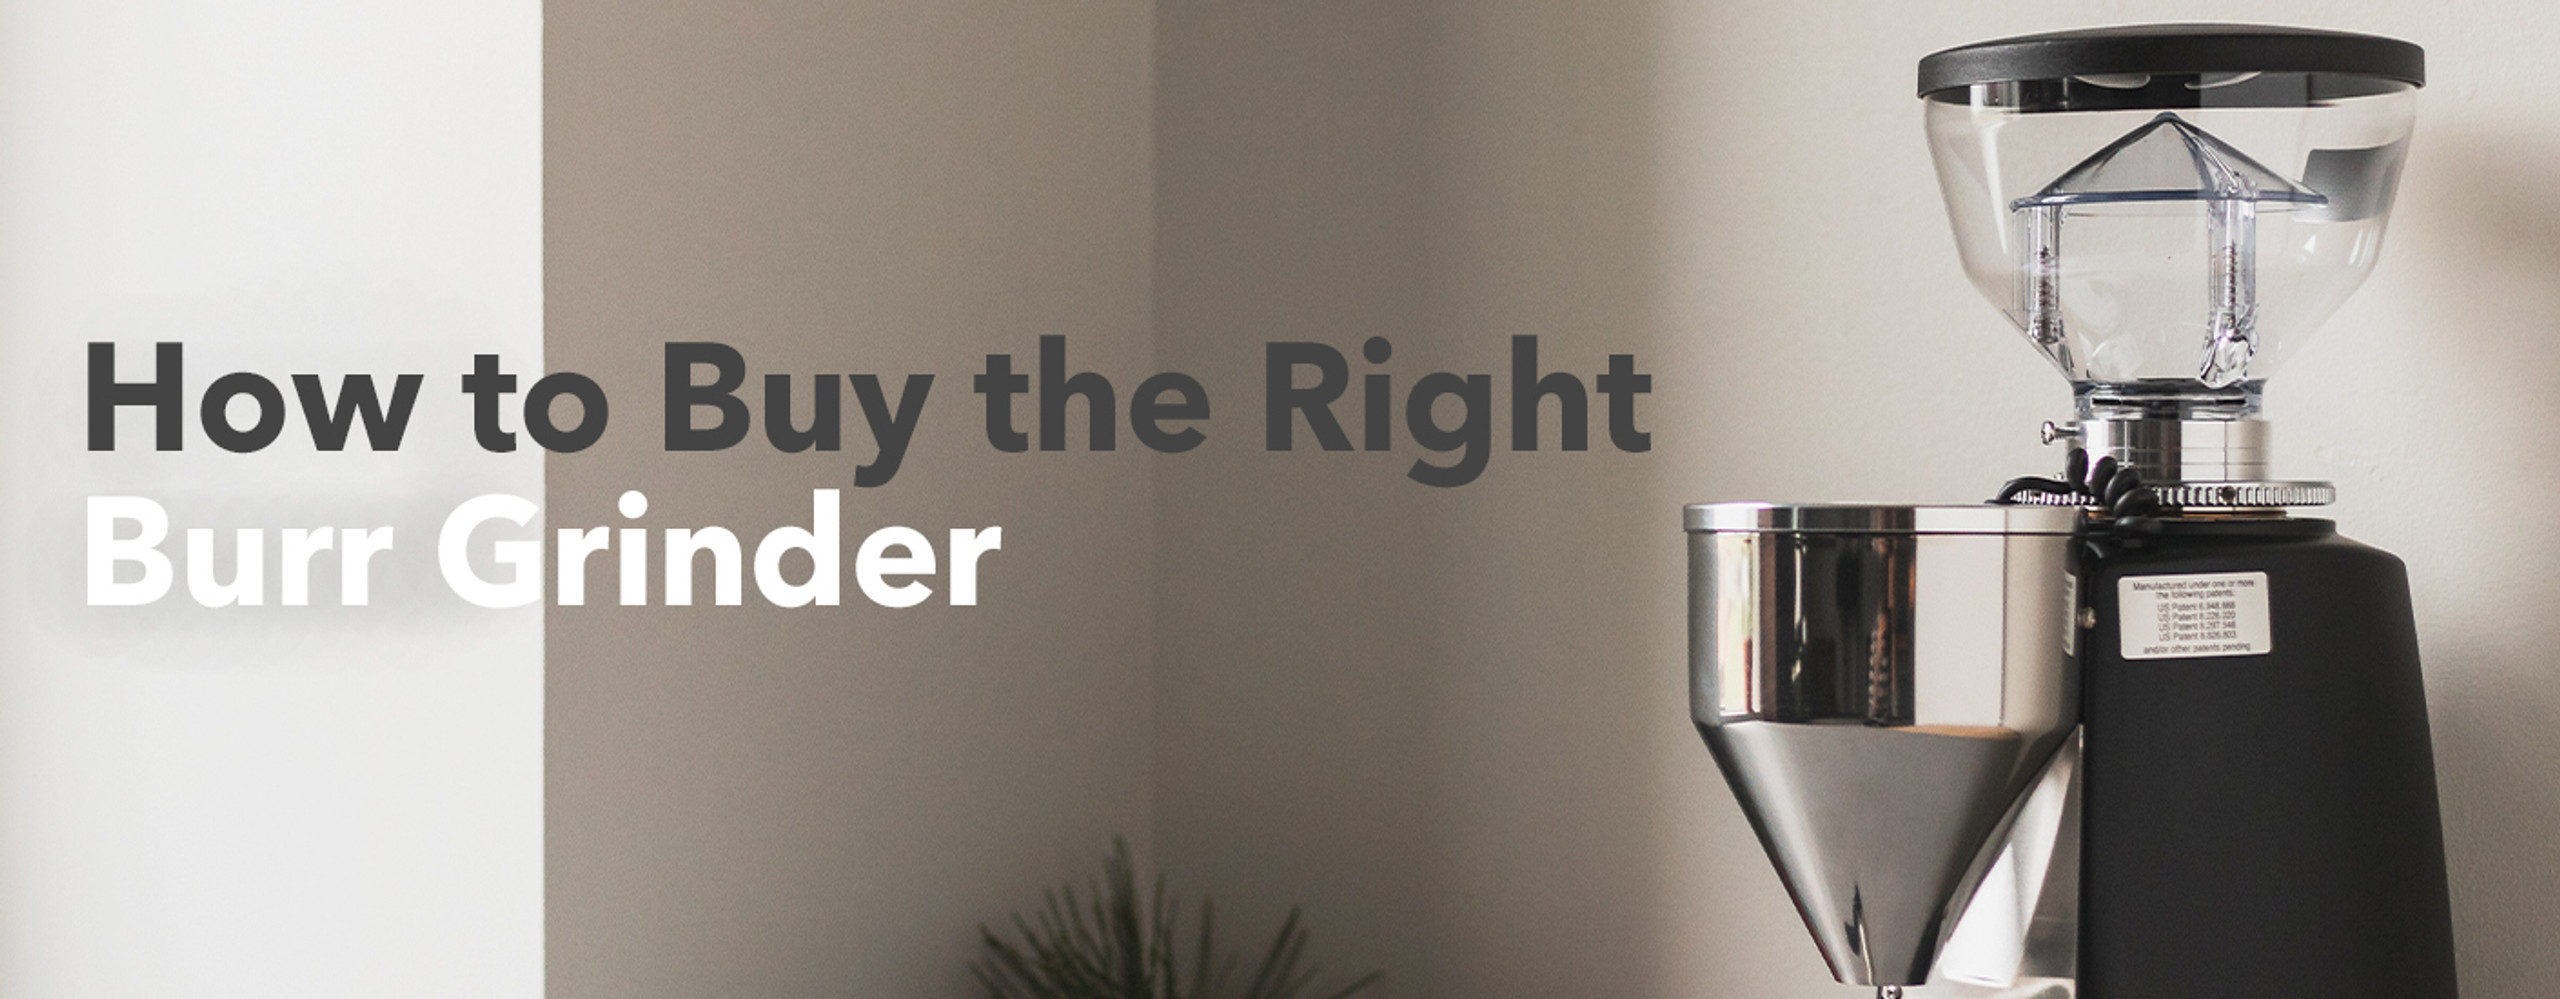 How to Buy the Right Burr Grinder